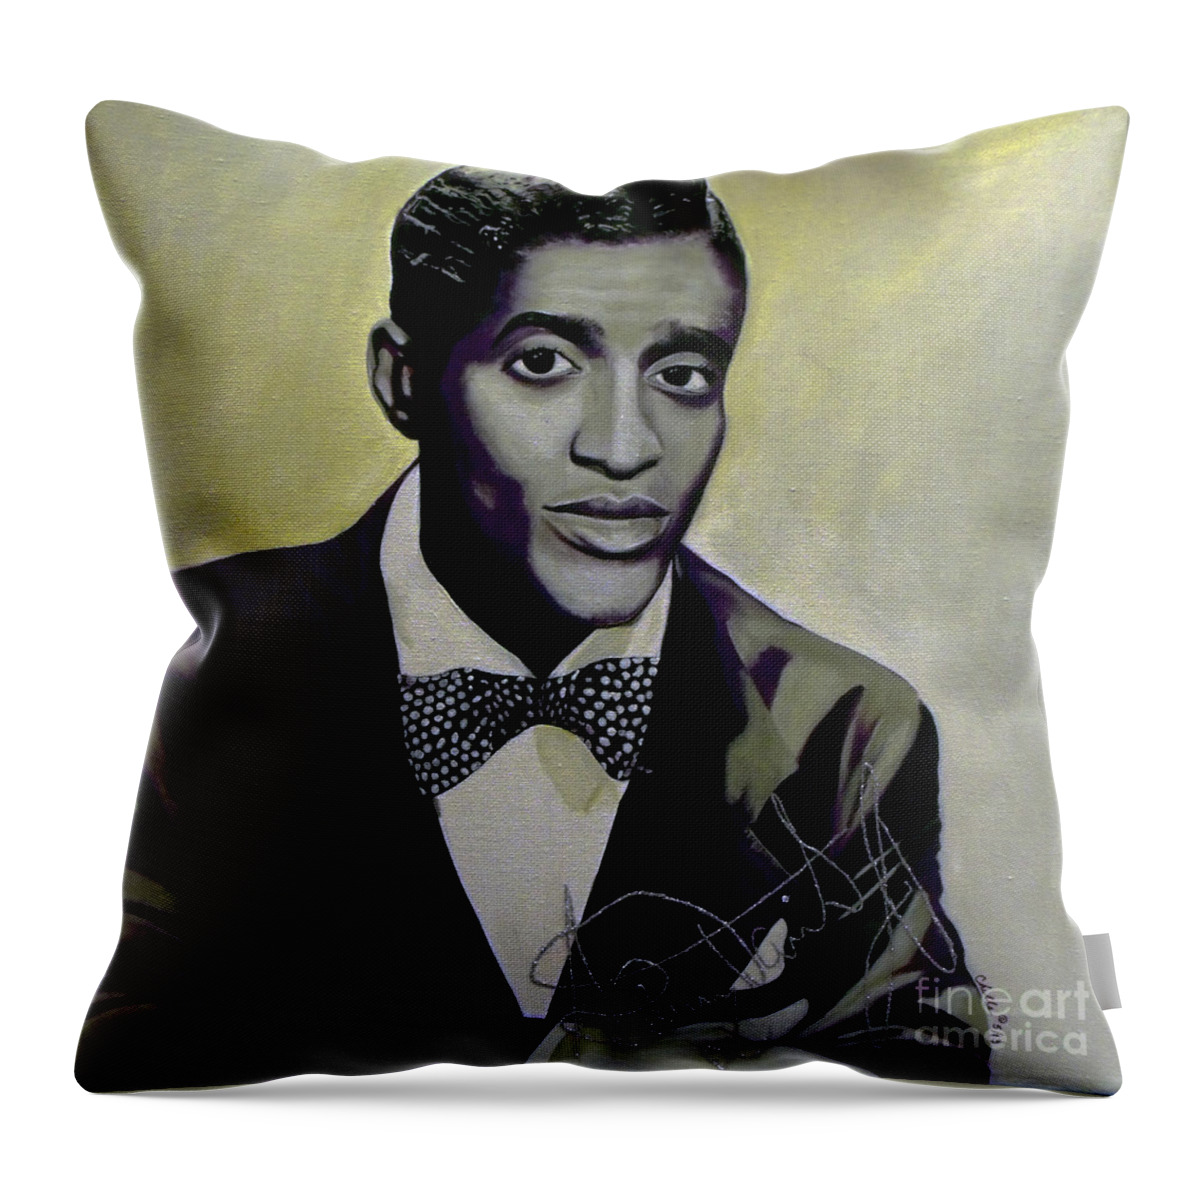 Acrylic Throw Pillow featuring the painting Sammy Davis Jr. by Michelle Brantley